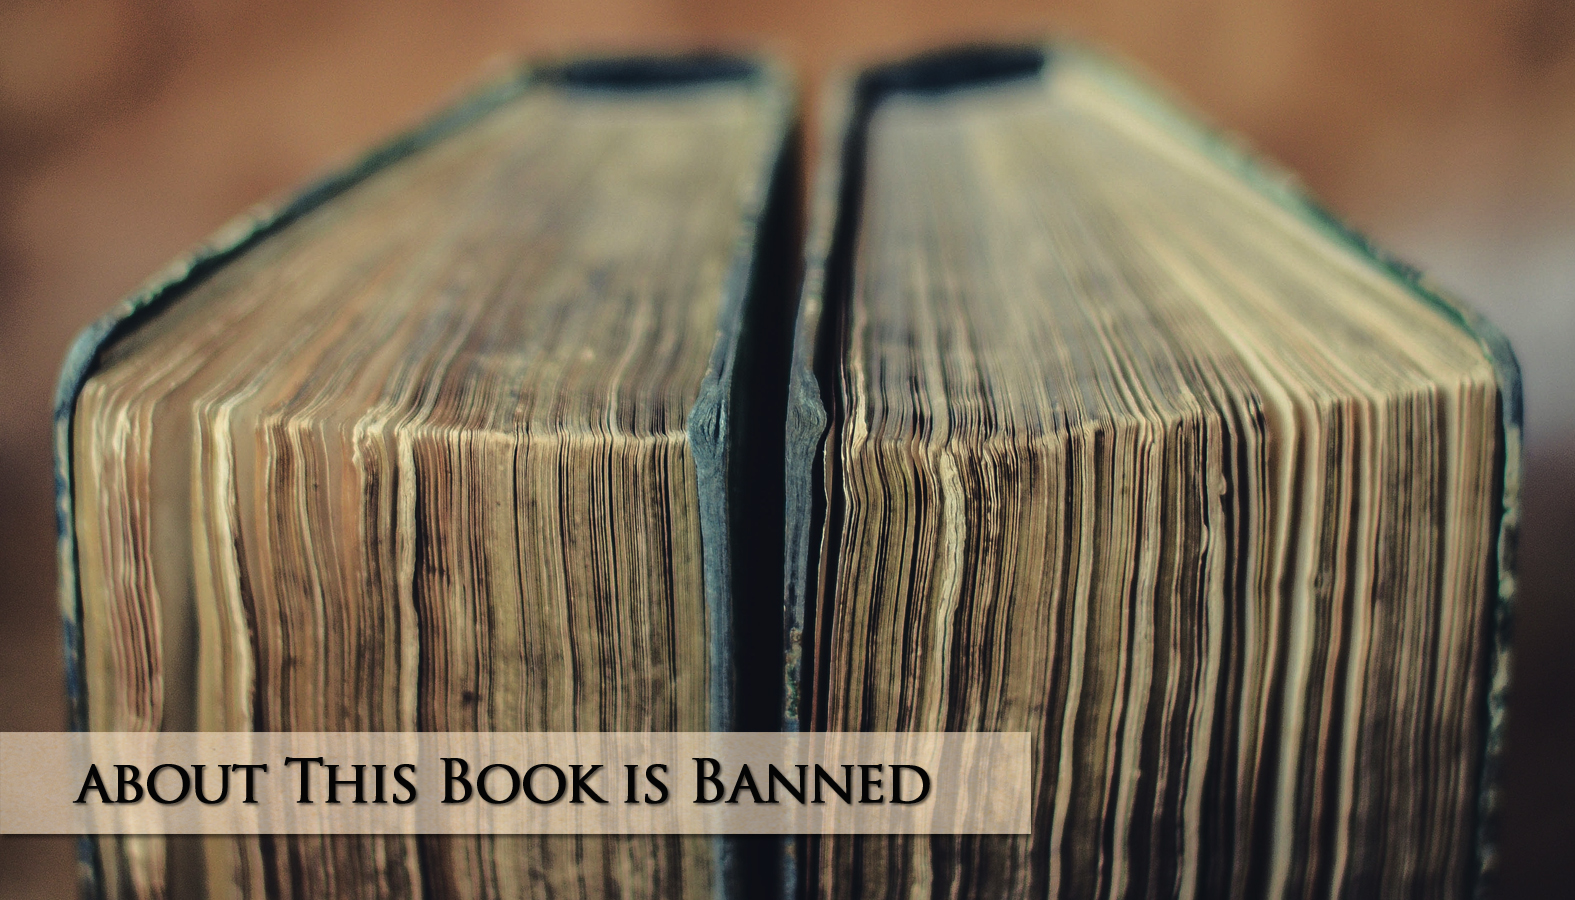 fanned vintage books - about this book is banned